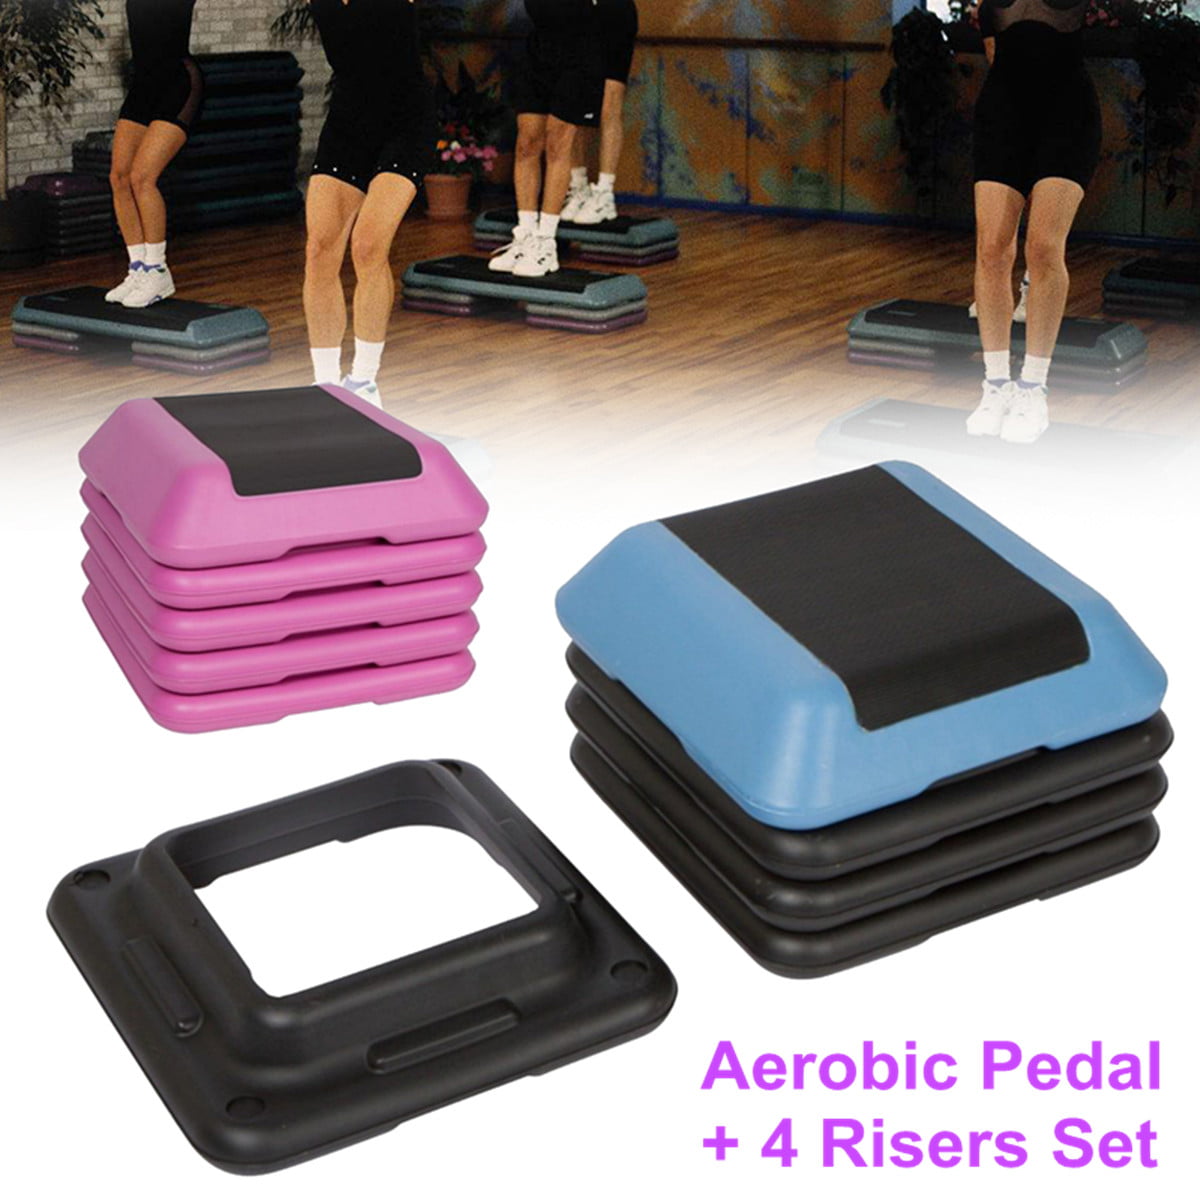 NEXPro High Step Work Out Training Device Set of 4 Risers